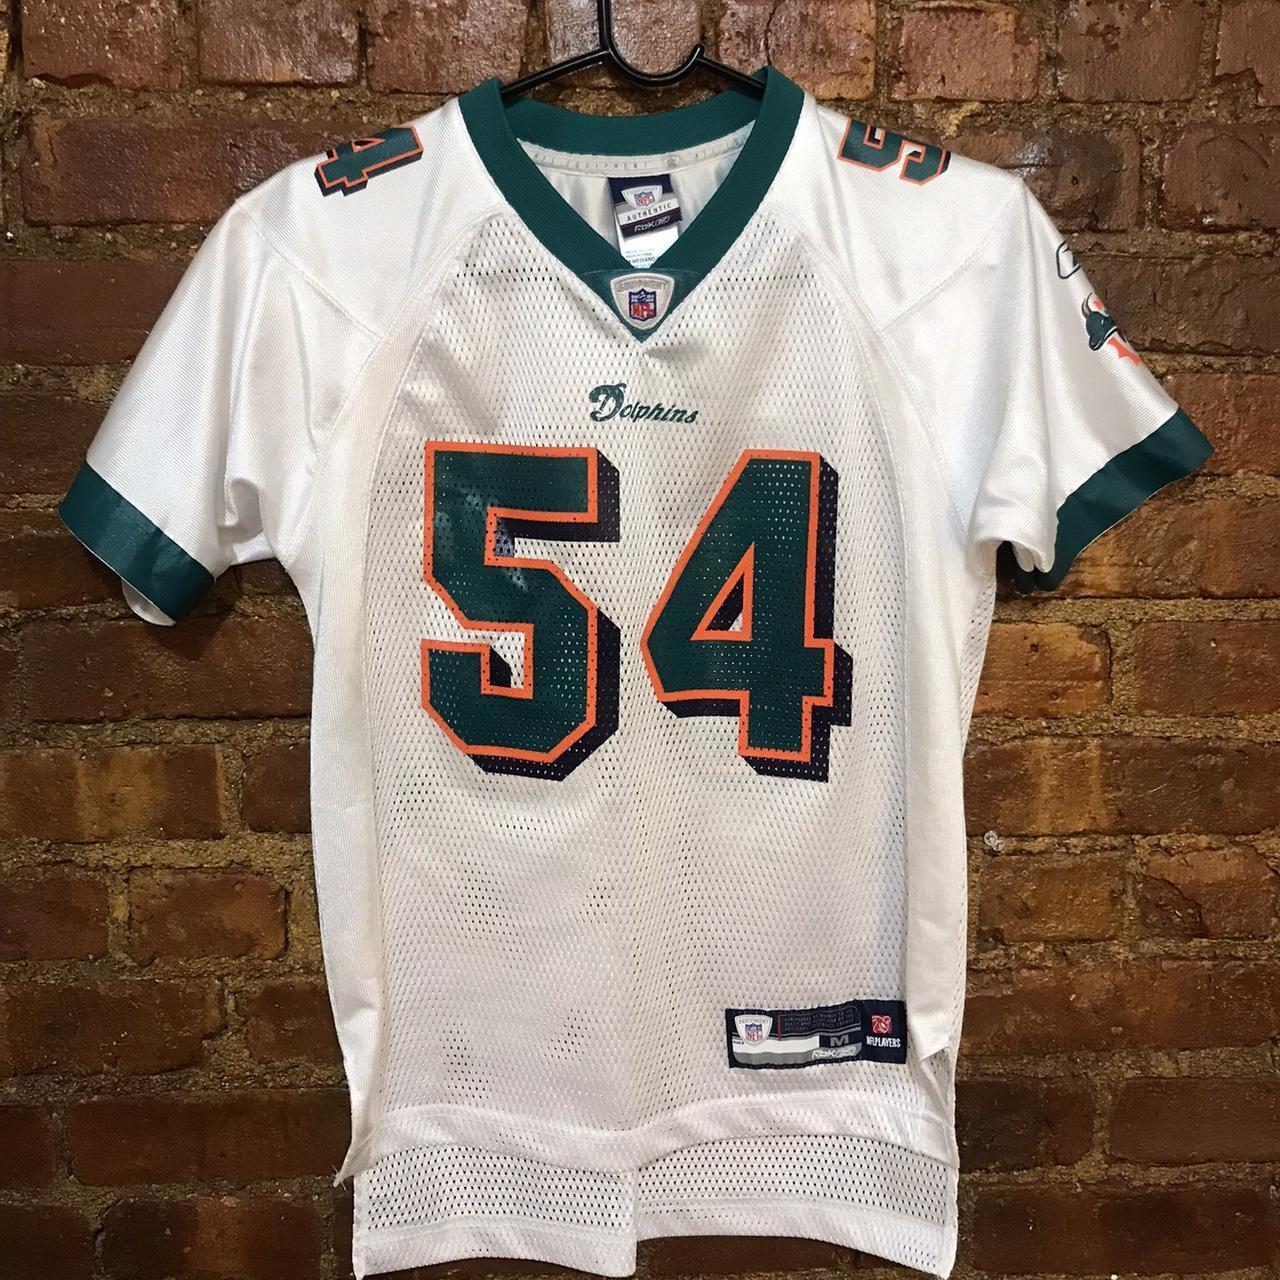 VTG WOMEN'S MIAMI DOLPHINS JERSEY White, green and - Depop